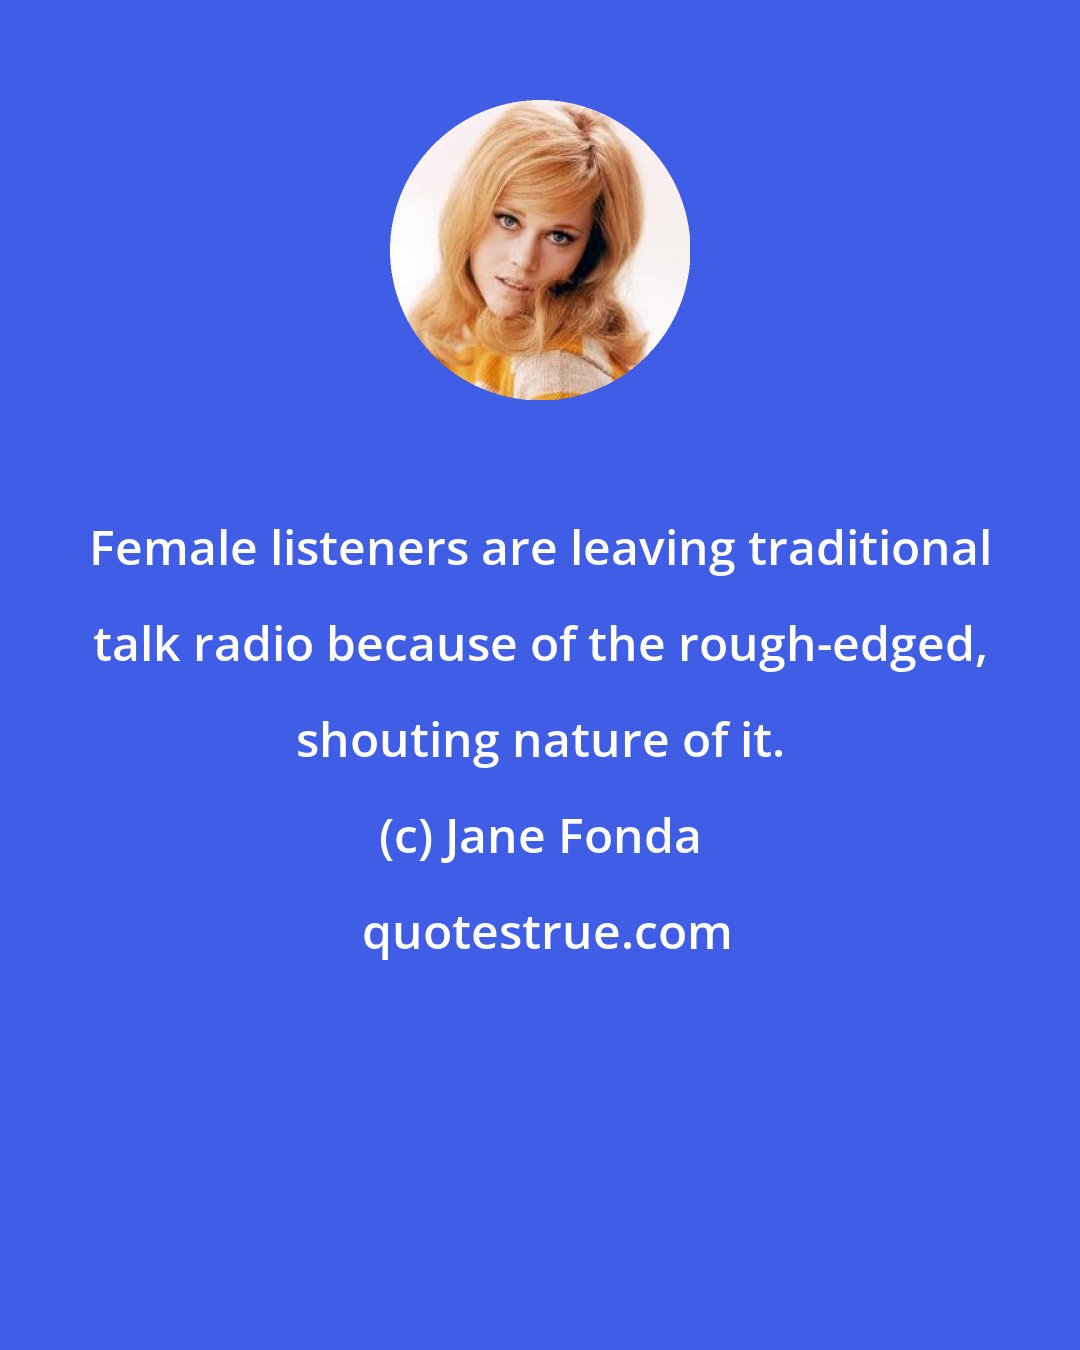 Jane Fonda: Female listeners are leaving traditional talk radio because of the rough-edged, shouting nature of it.